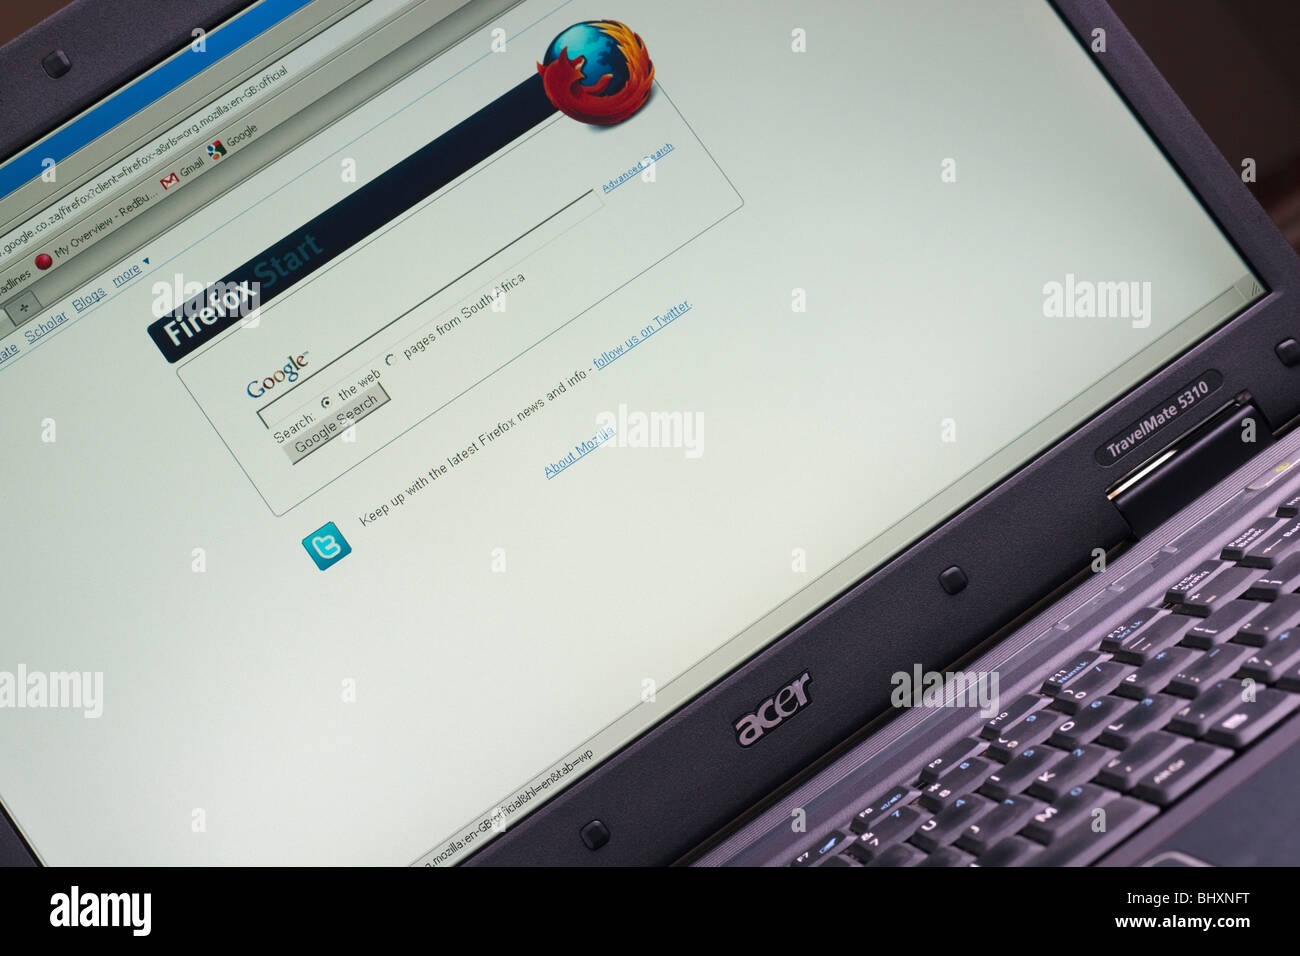 Abstract view of laptop showing browser connected to search engine. Stock Photo